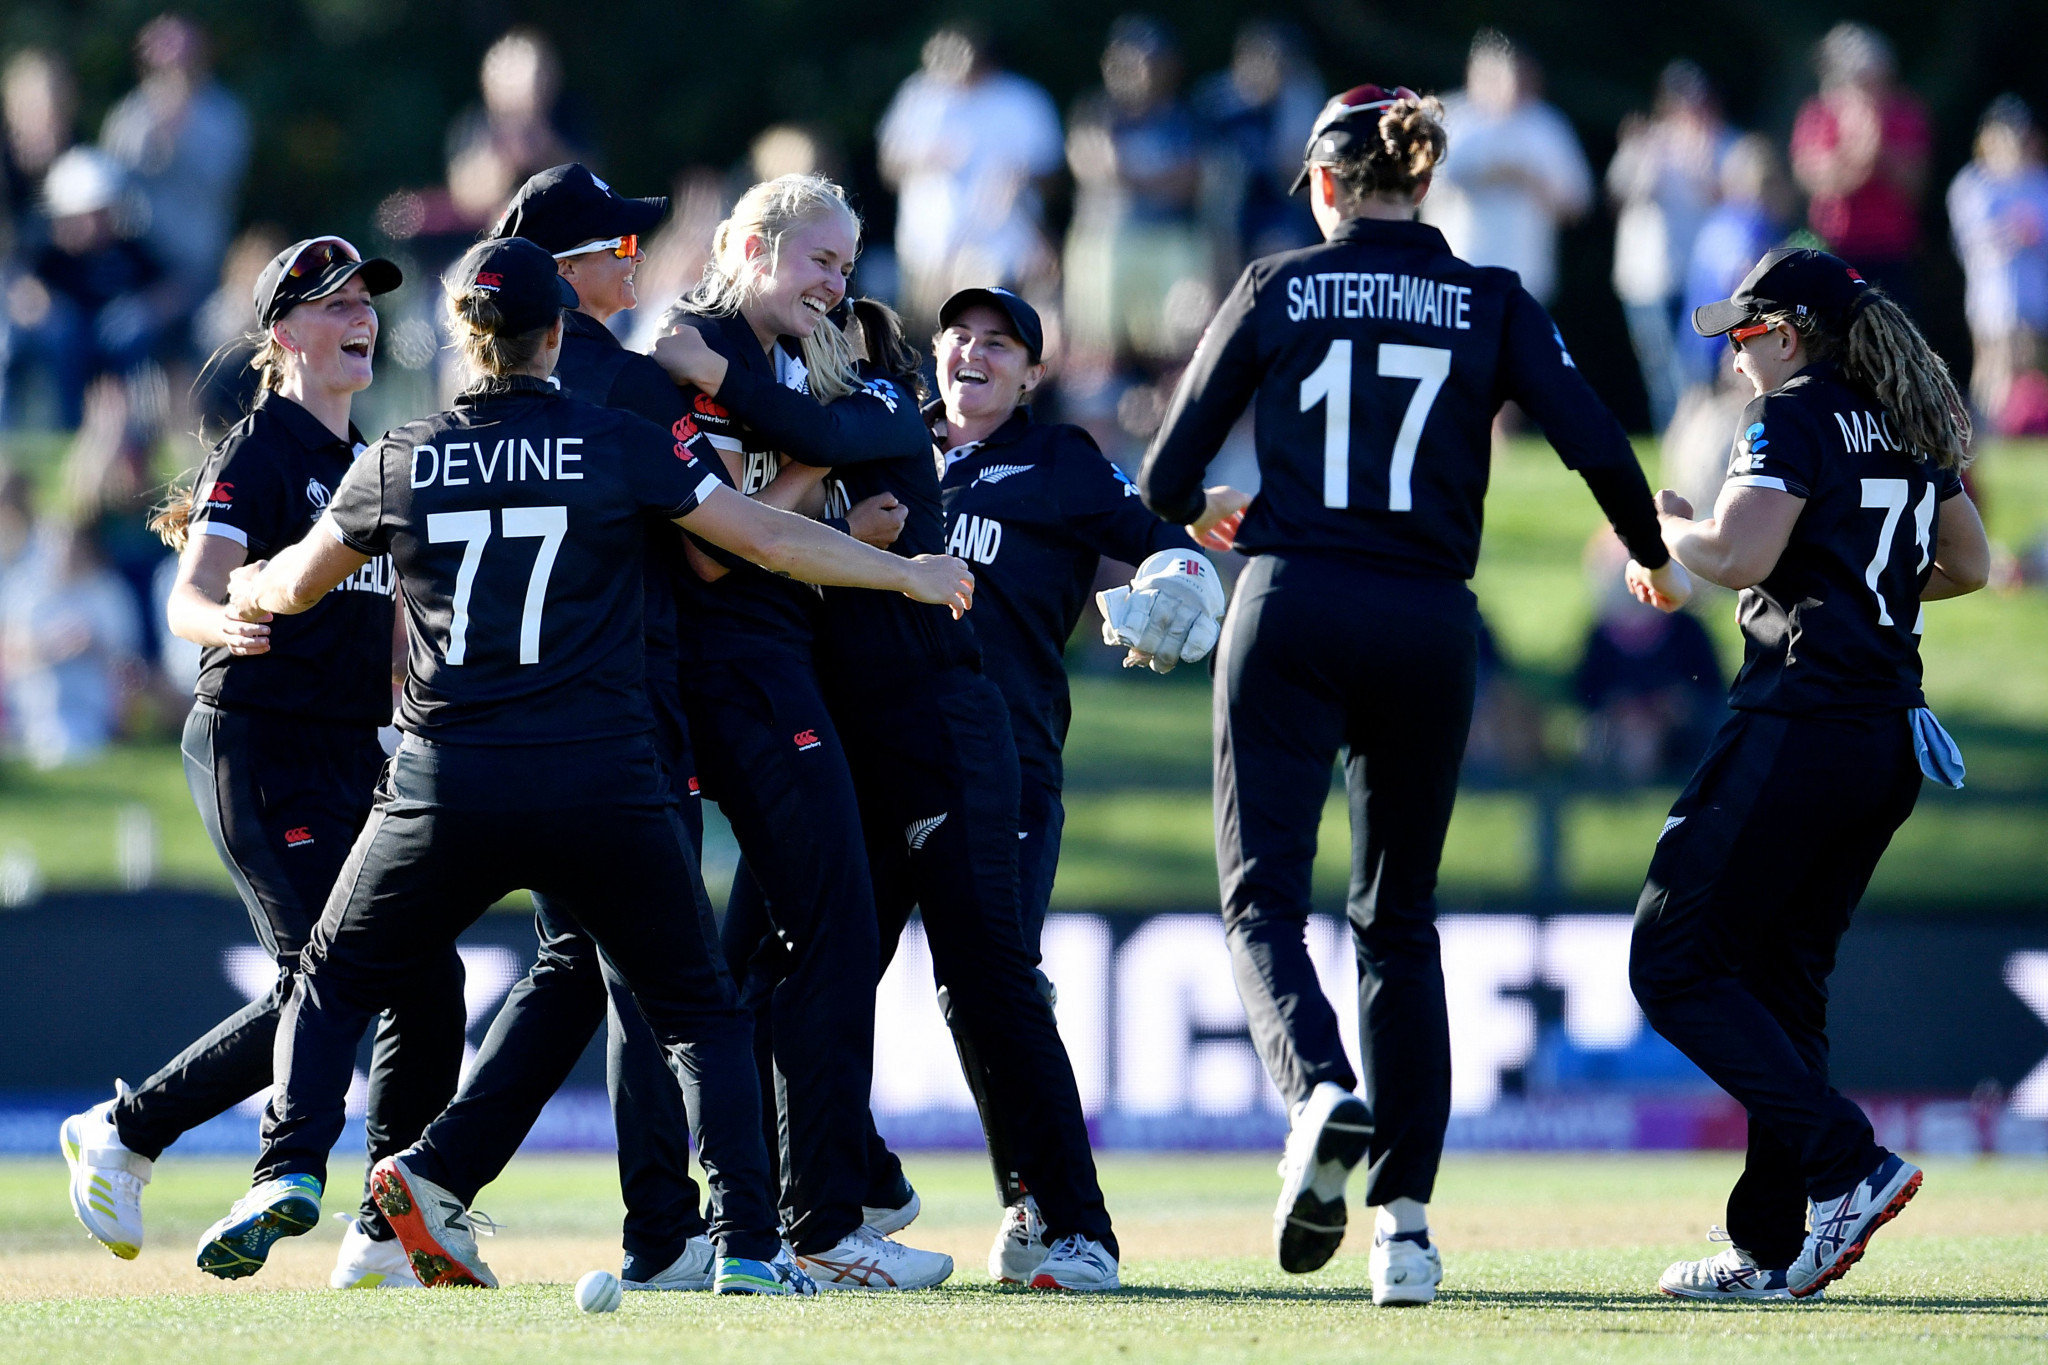 Bates and Rowe combine for dominant New Zealand win over Pakistan at Women’s Cricket World Cup